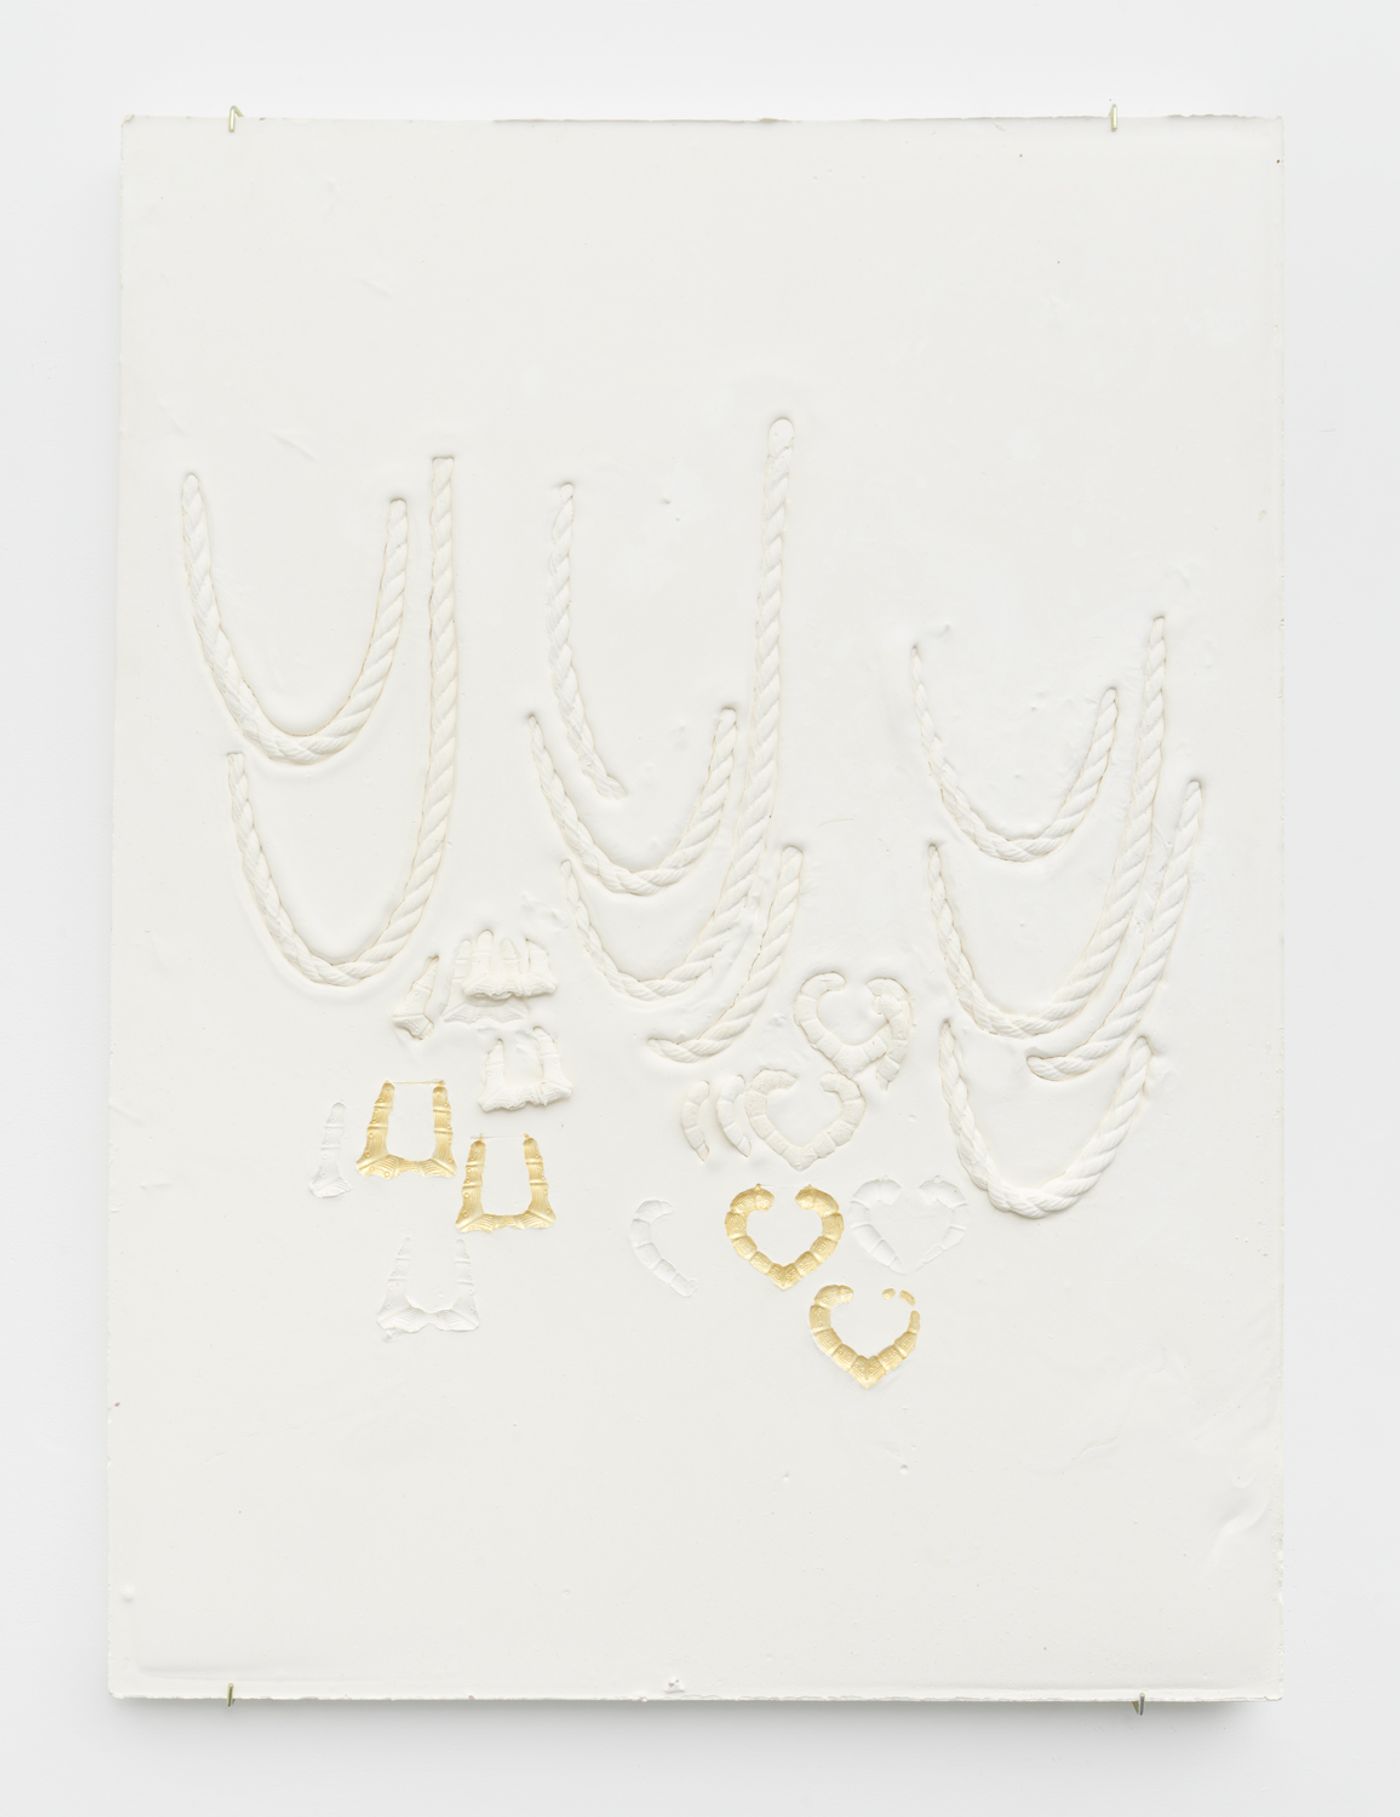 Image of Composition with Rope Chains Overlapping Bamboo Earrings, Impressed with Gold , 2019: Plaster, foam, and acrylic